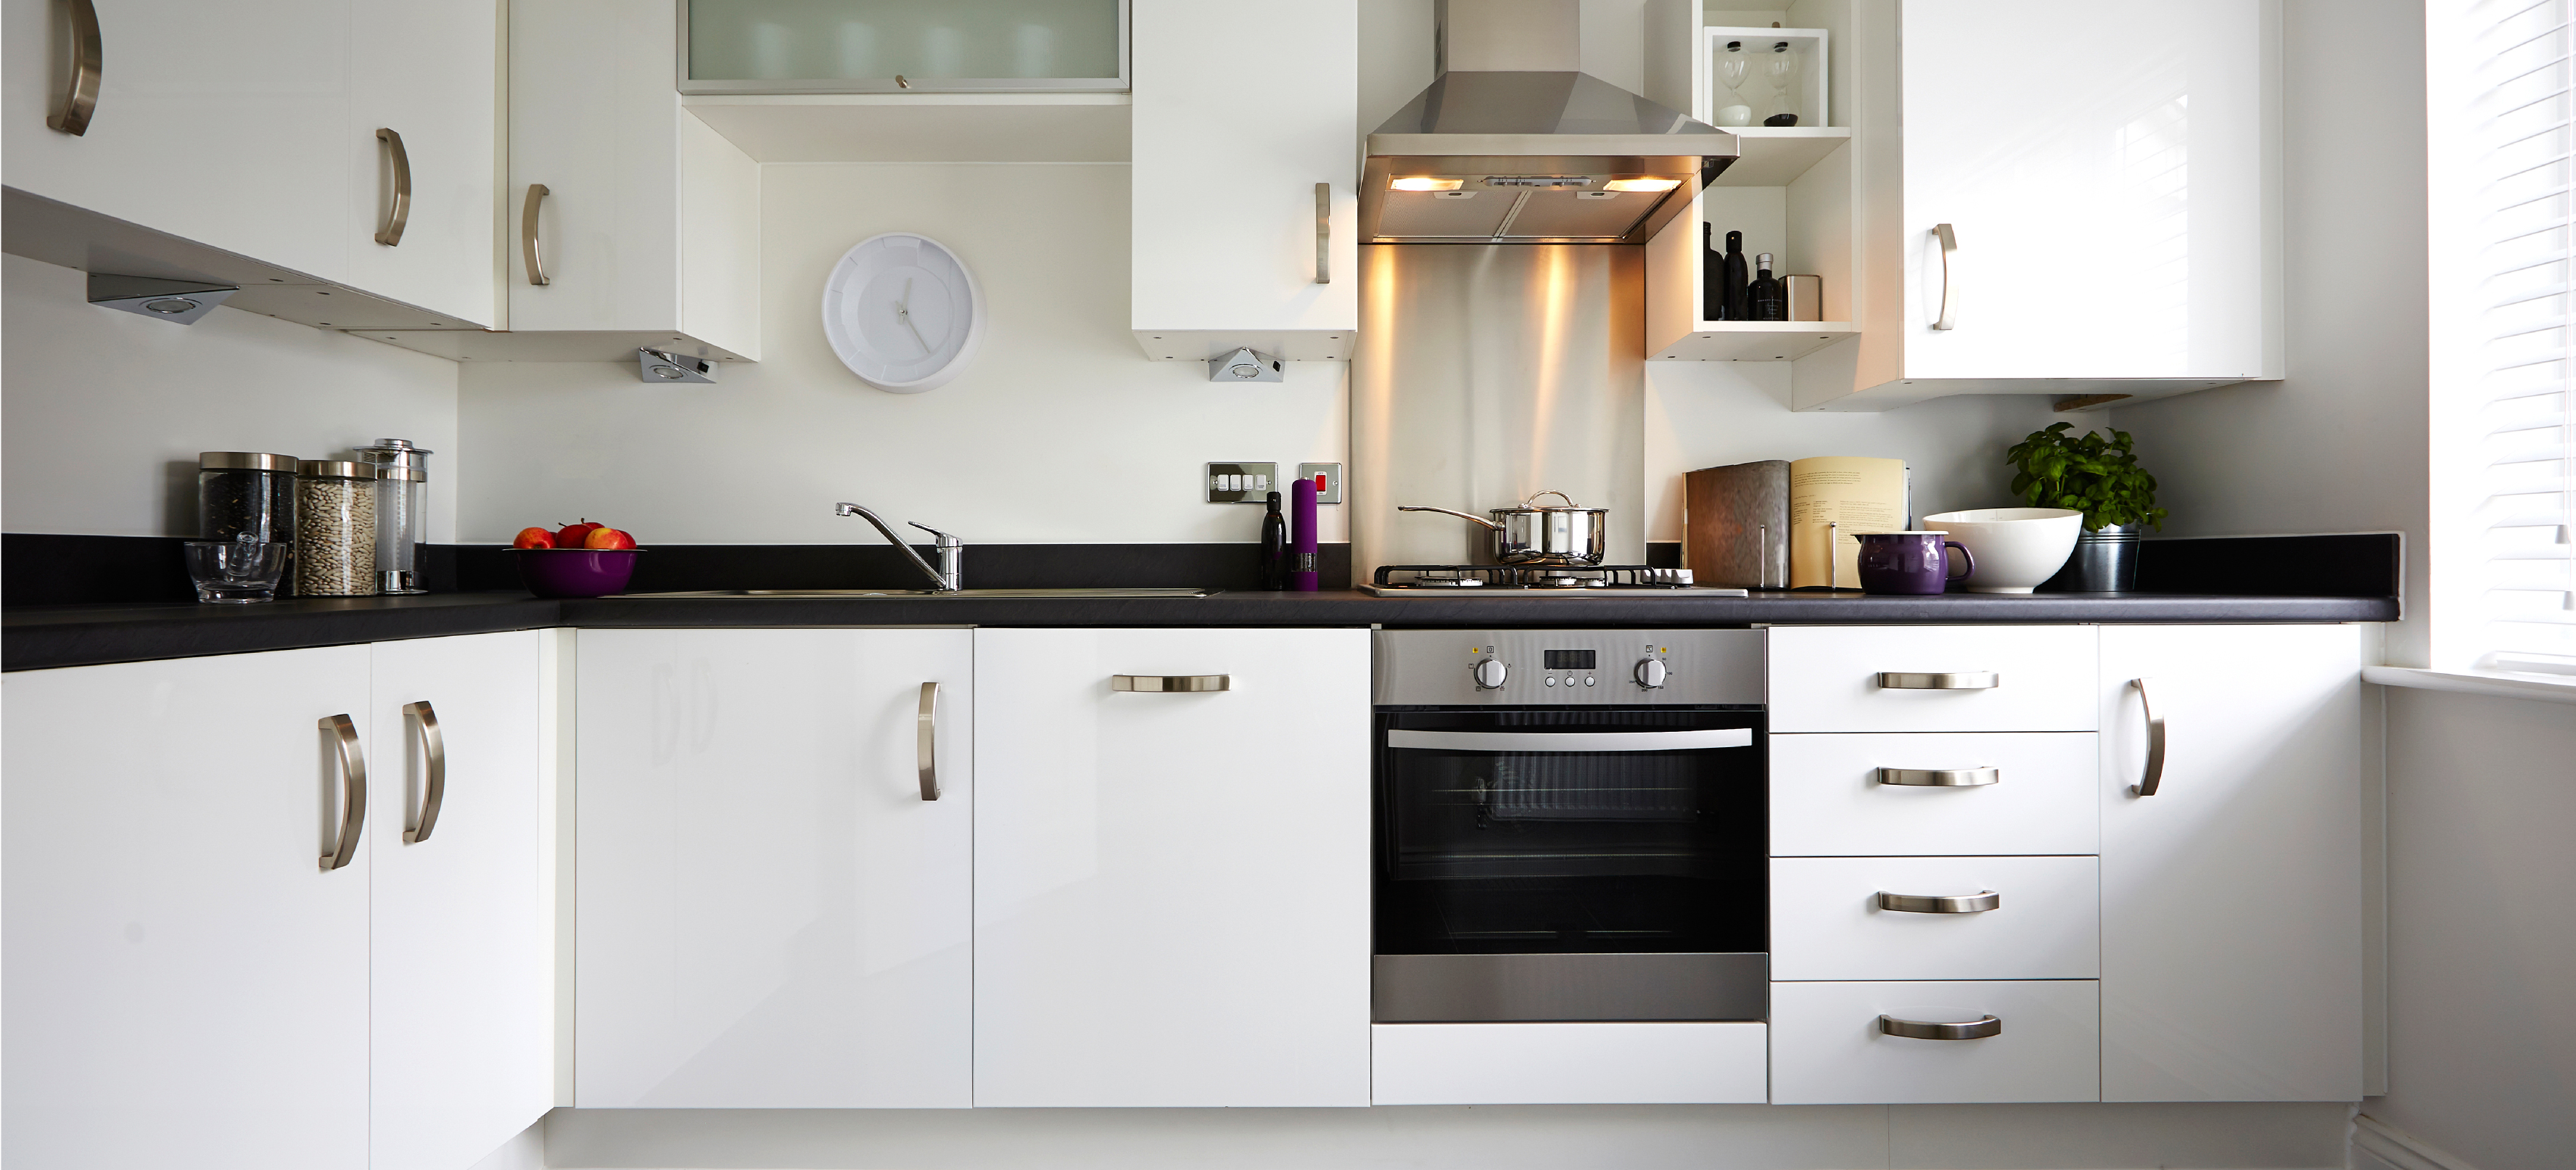 Modular kitchen Sizes and Dimensions in India You Need to Know About!